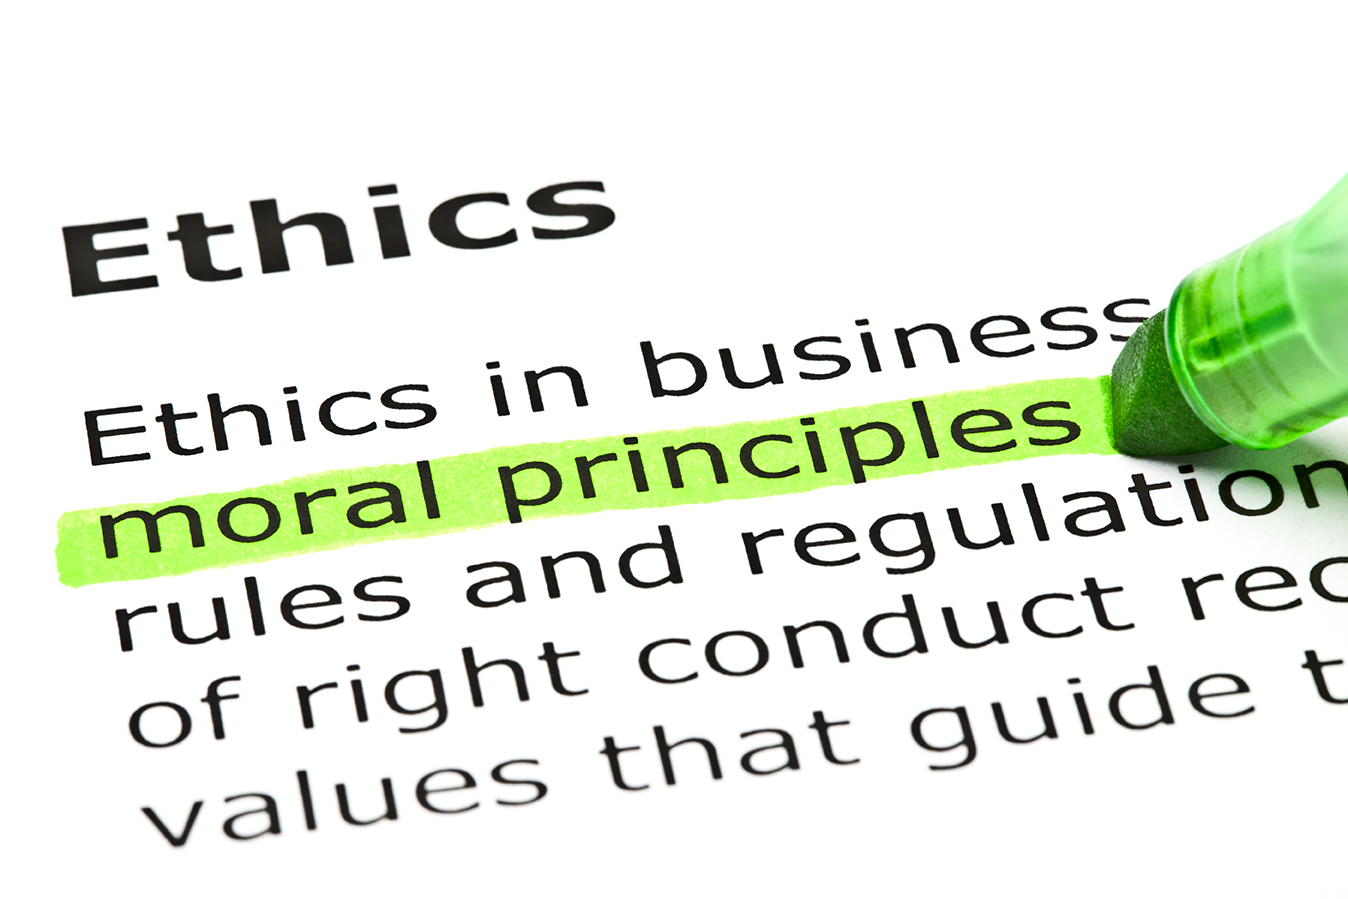 'Moral principles' highlighted in green